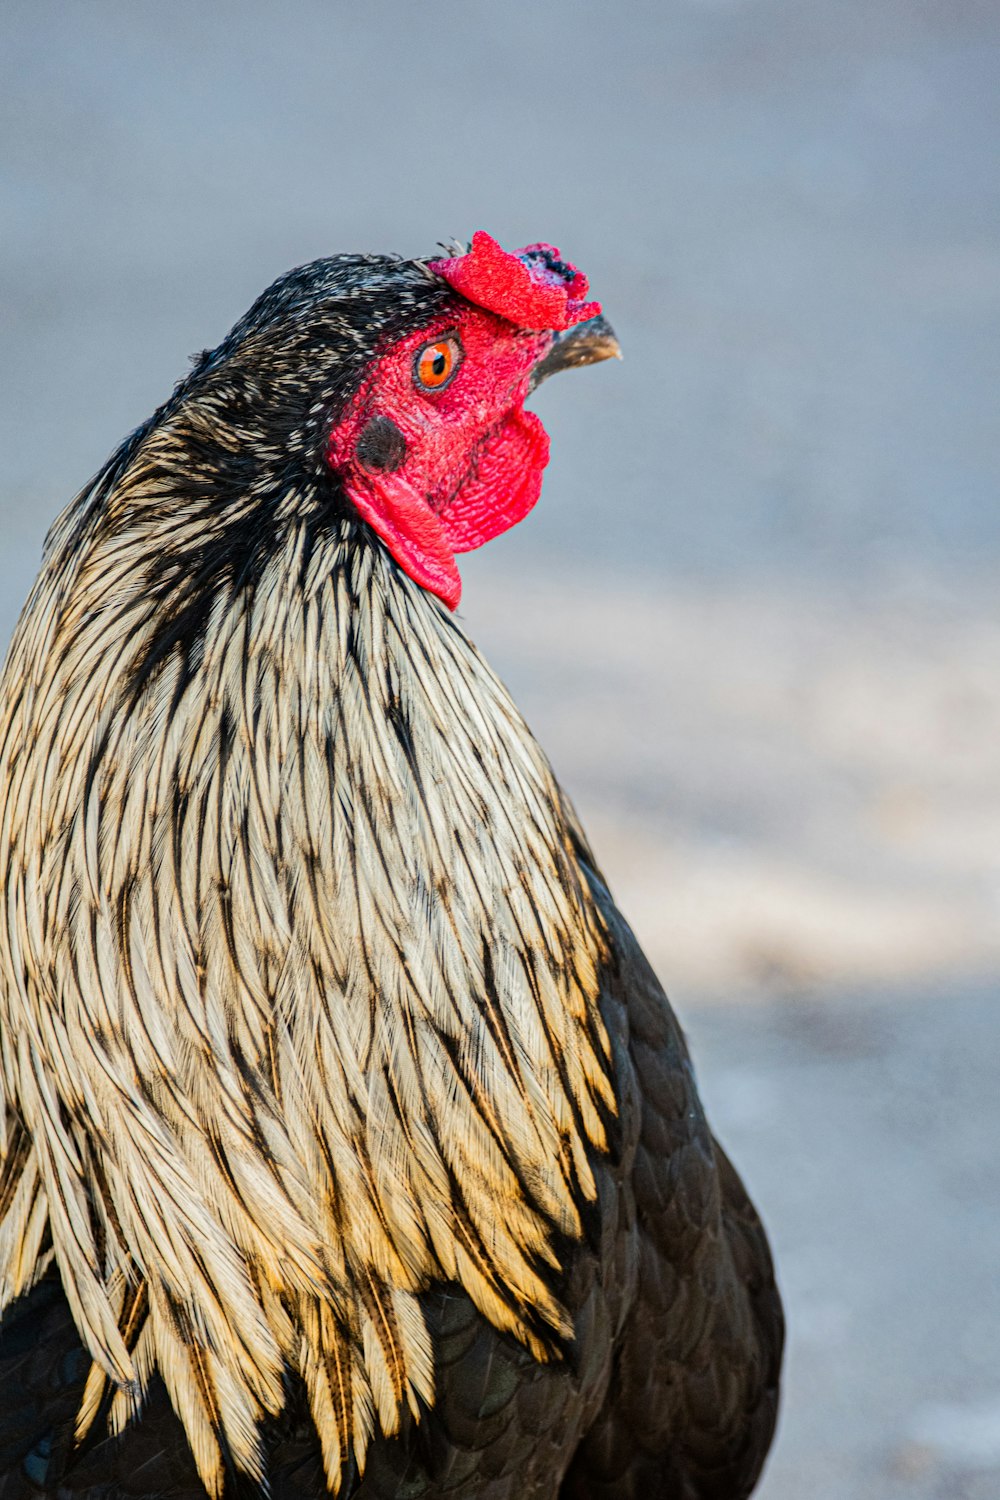 a close up of a rooster with a red head